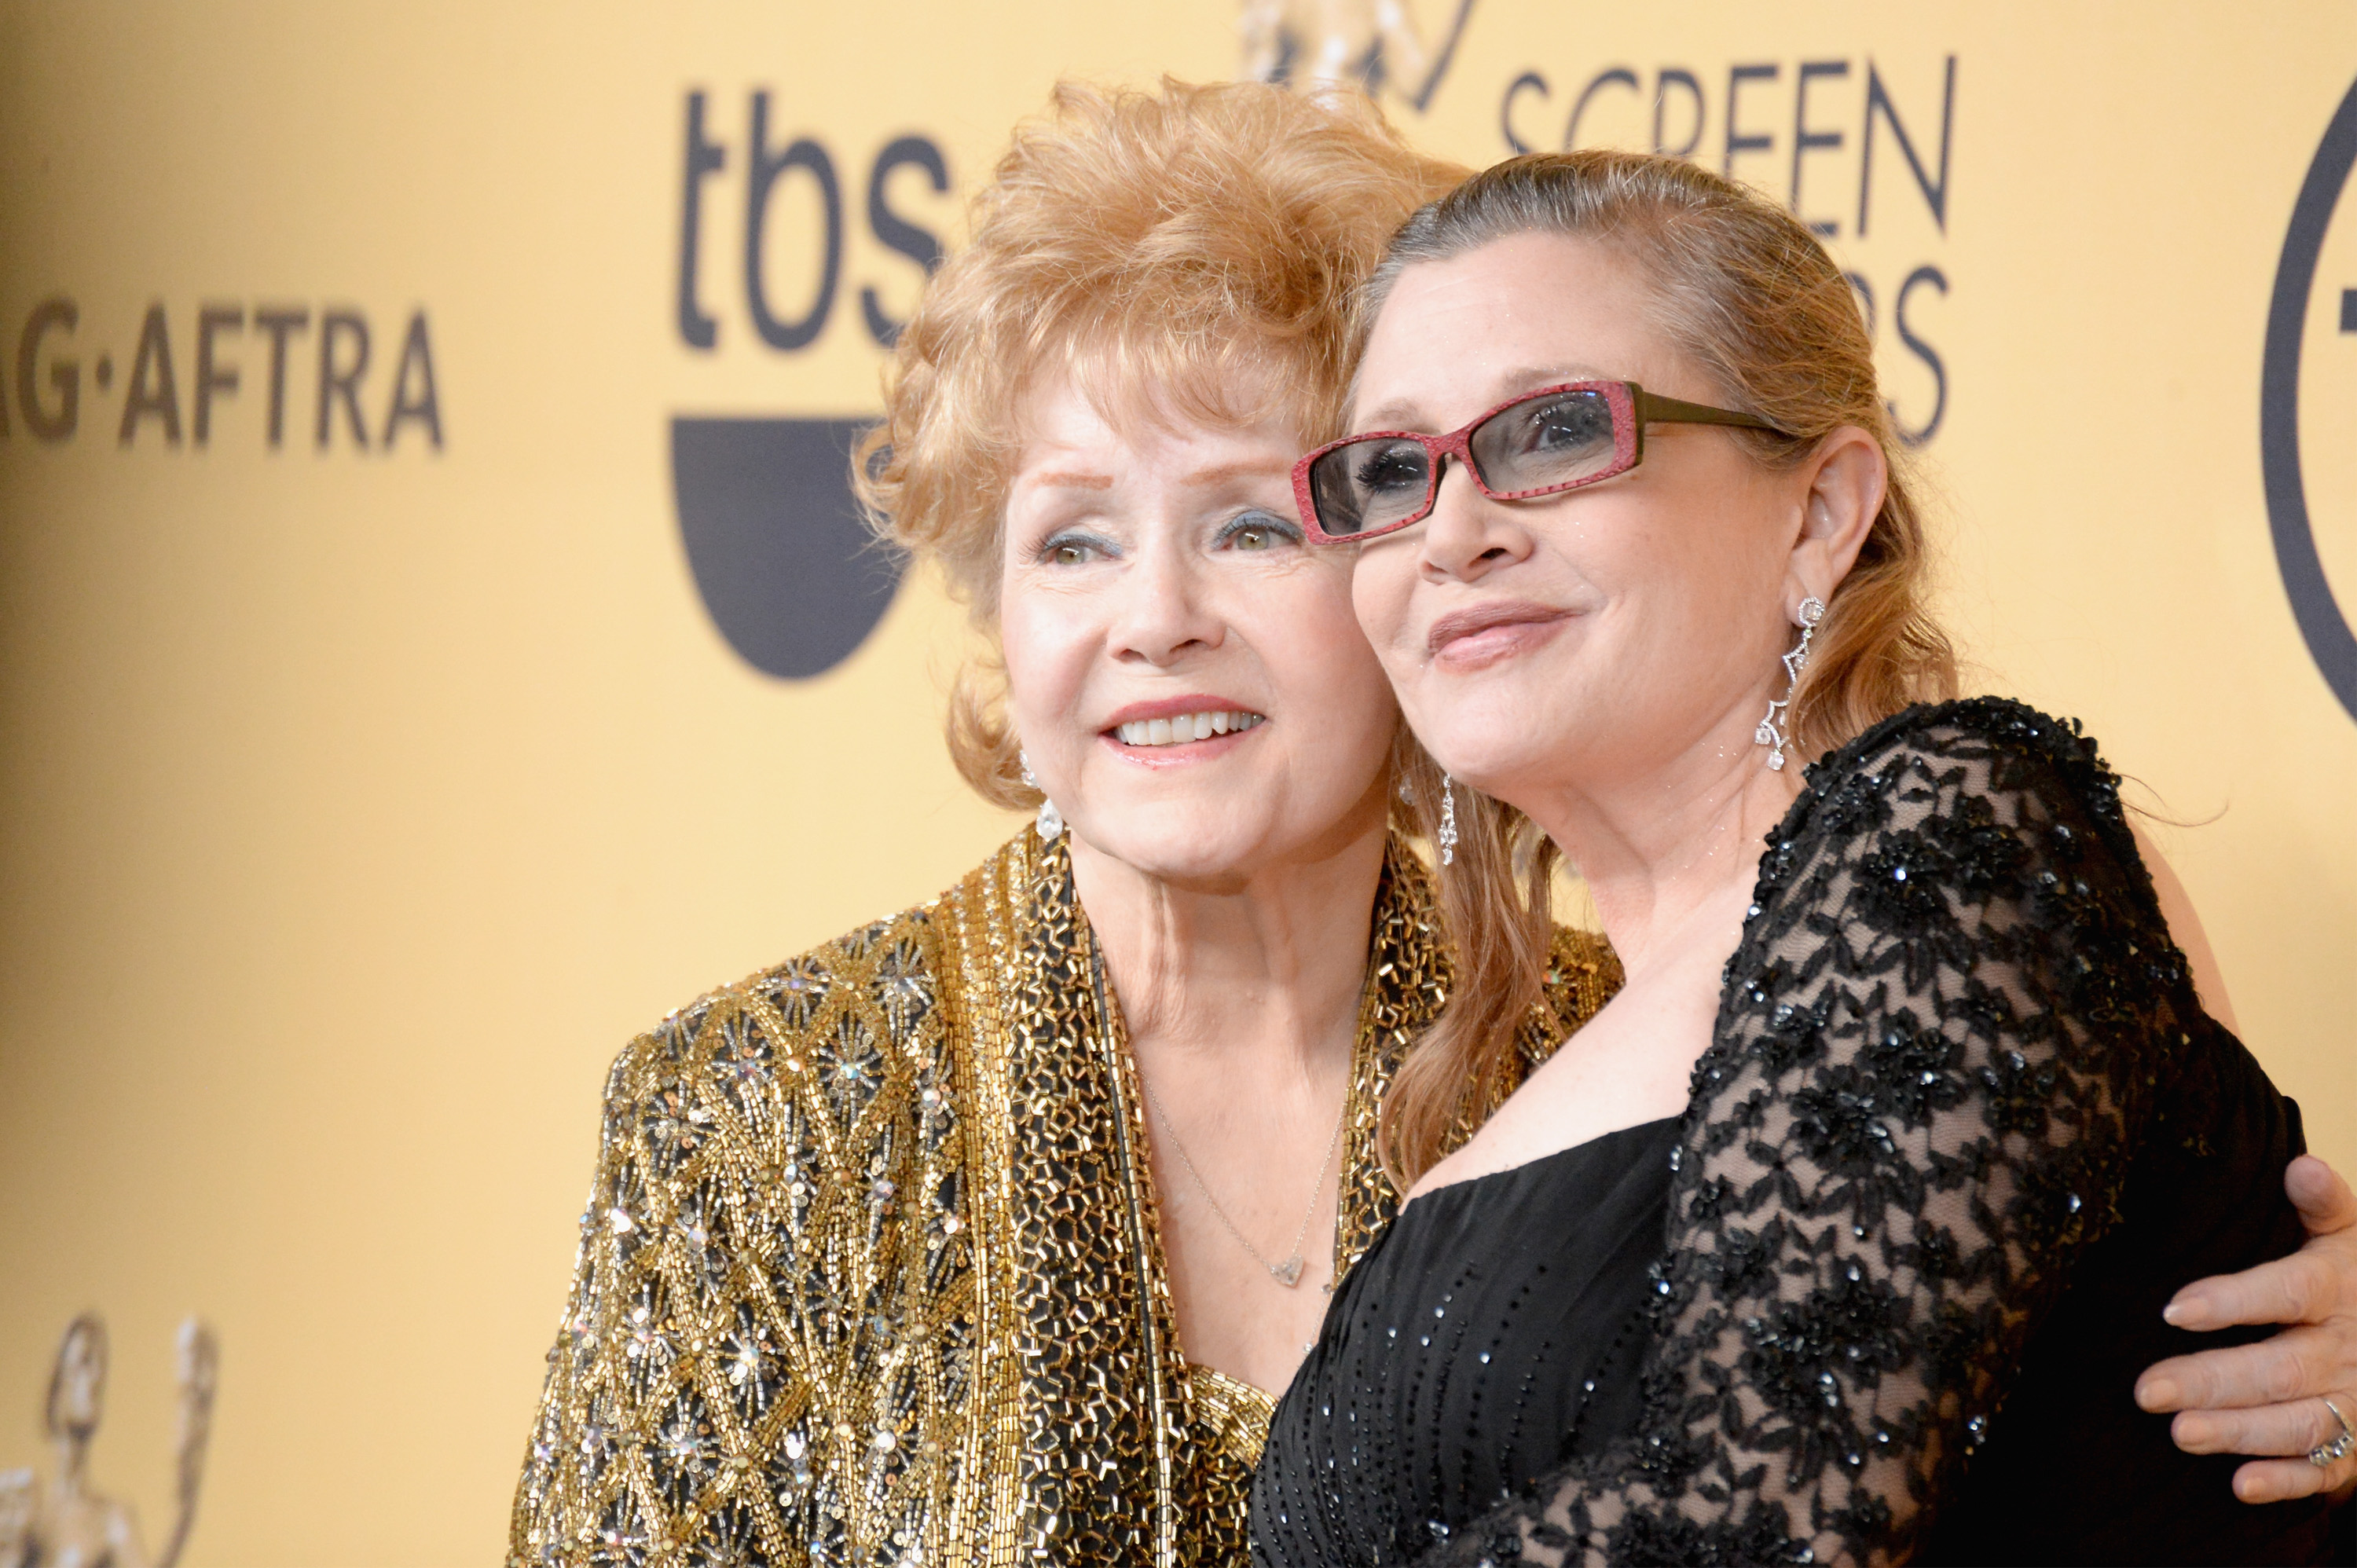 Carrie Fisher and Debbie Reynolds on January 25, 2015 in Los Angeles, California. | Source: Getty Images